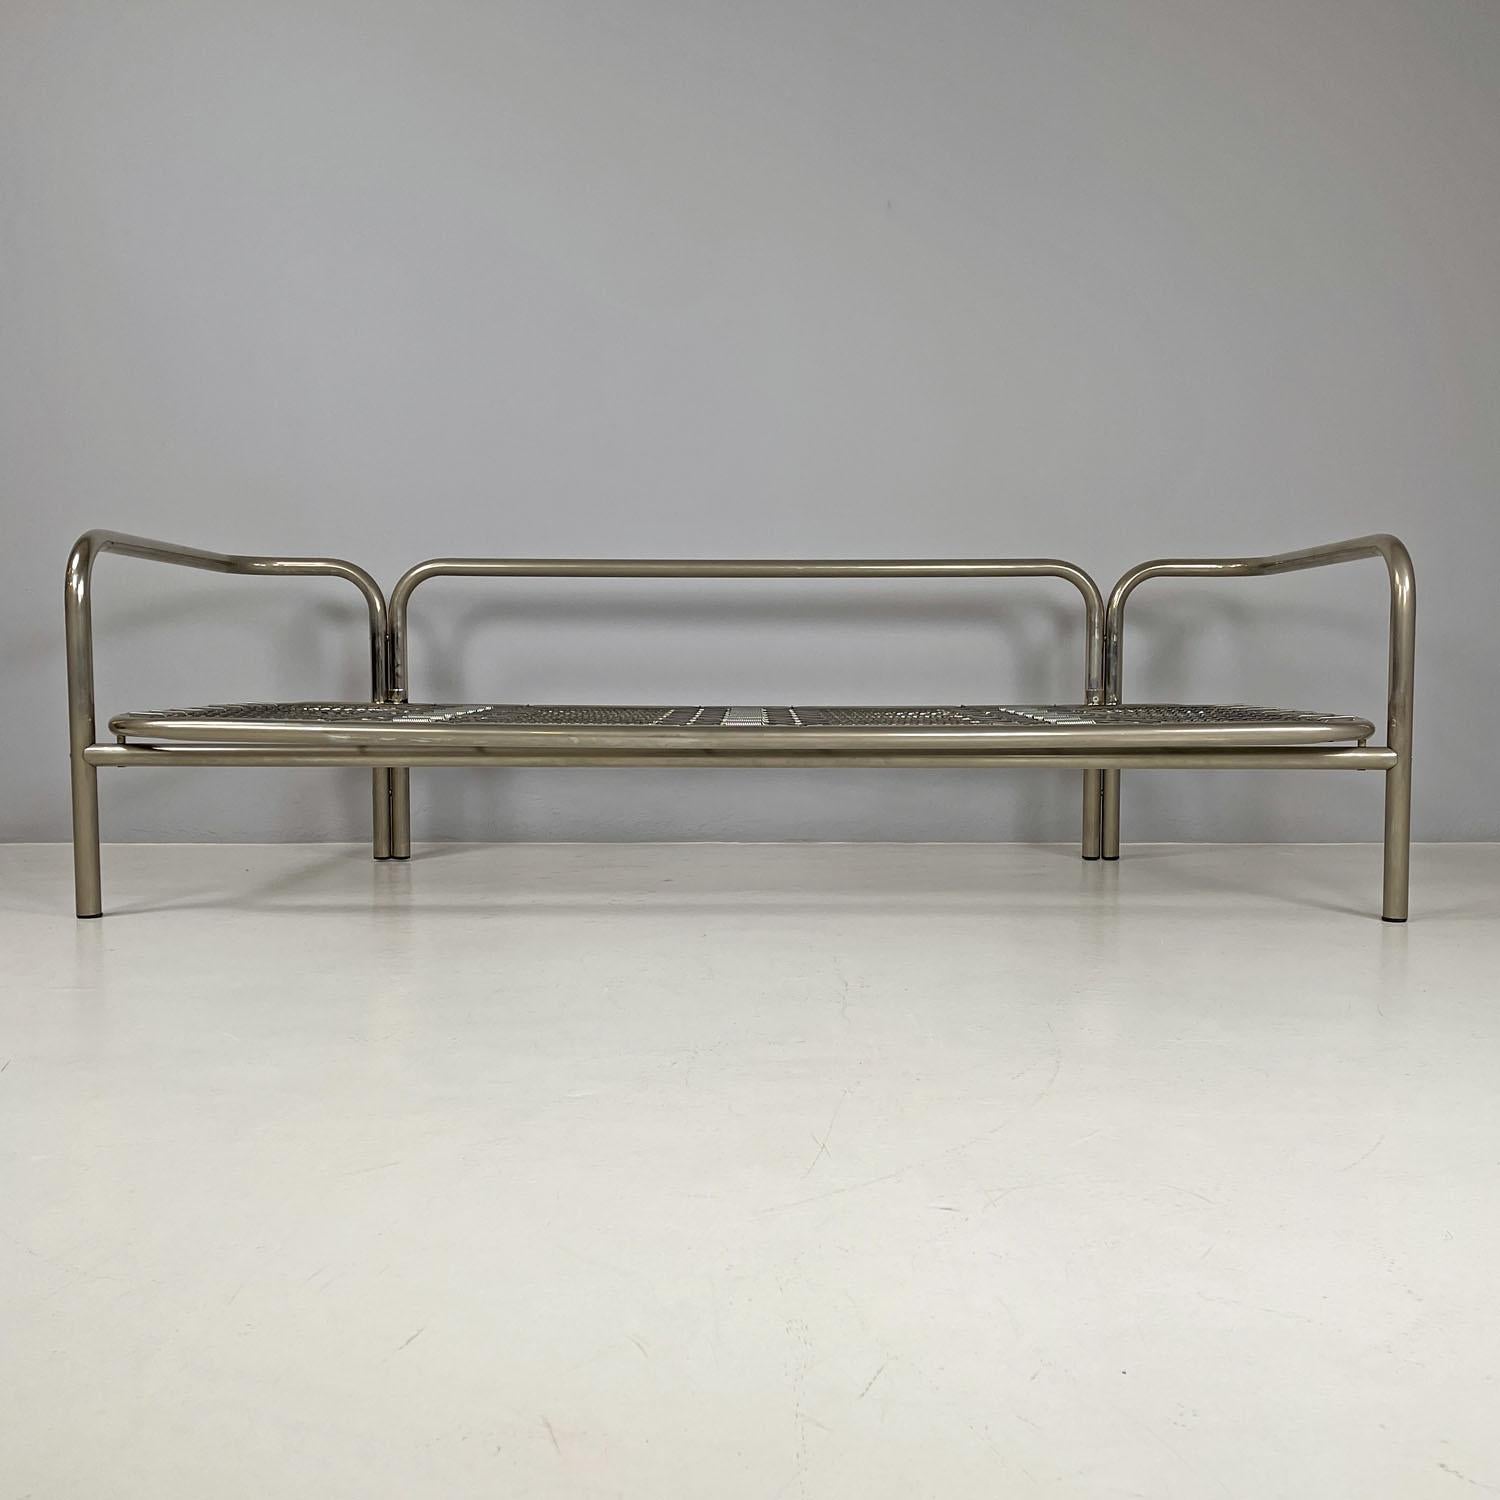 Italian modern daybed sofa Locus Solus by Gae Aulenti for Poltronova, 1970s In Good Condition For Sale In MIlano, IT